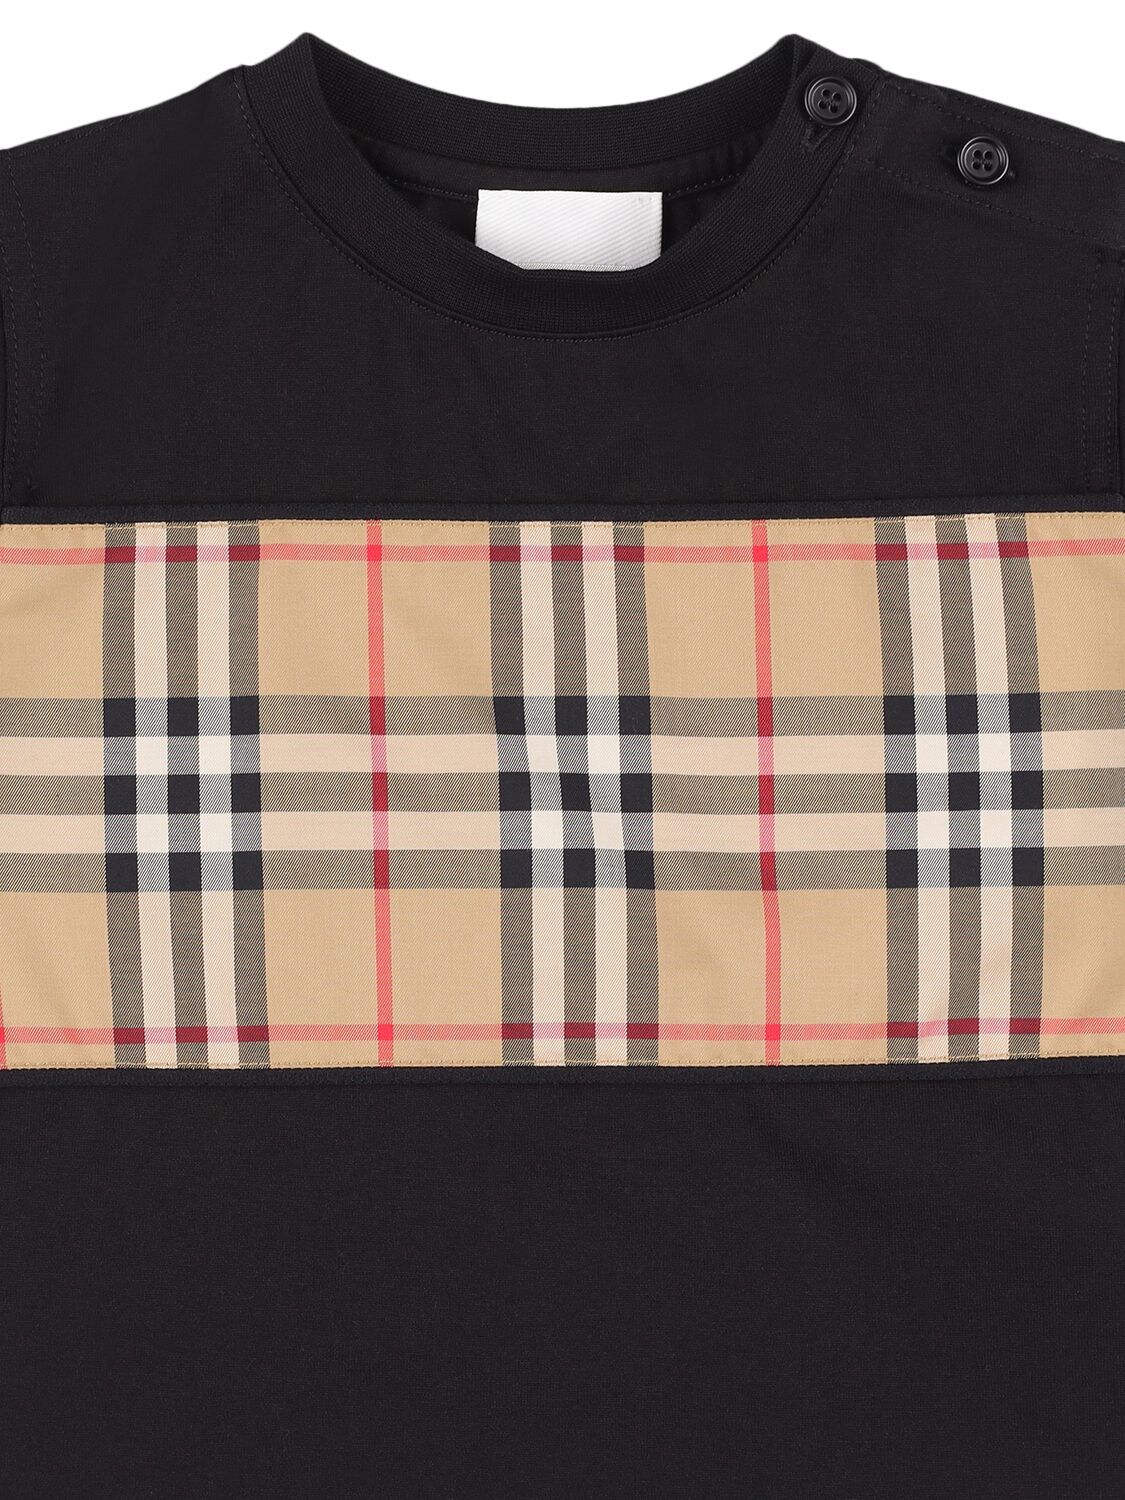 Shop Burberry Cotton Jersey T-shirt W/ Check Insert In Black